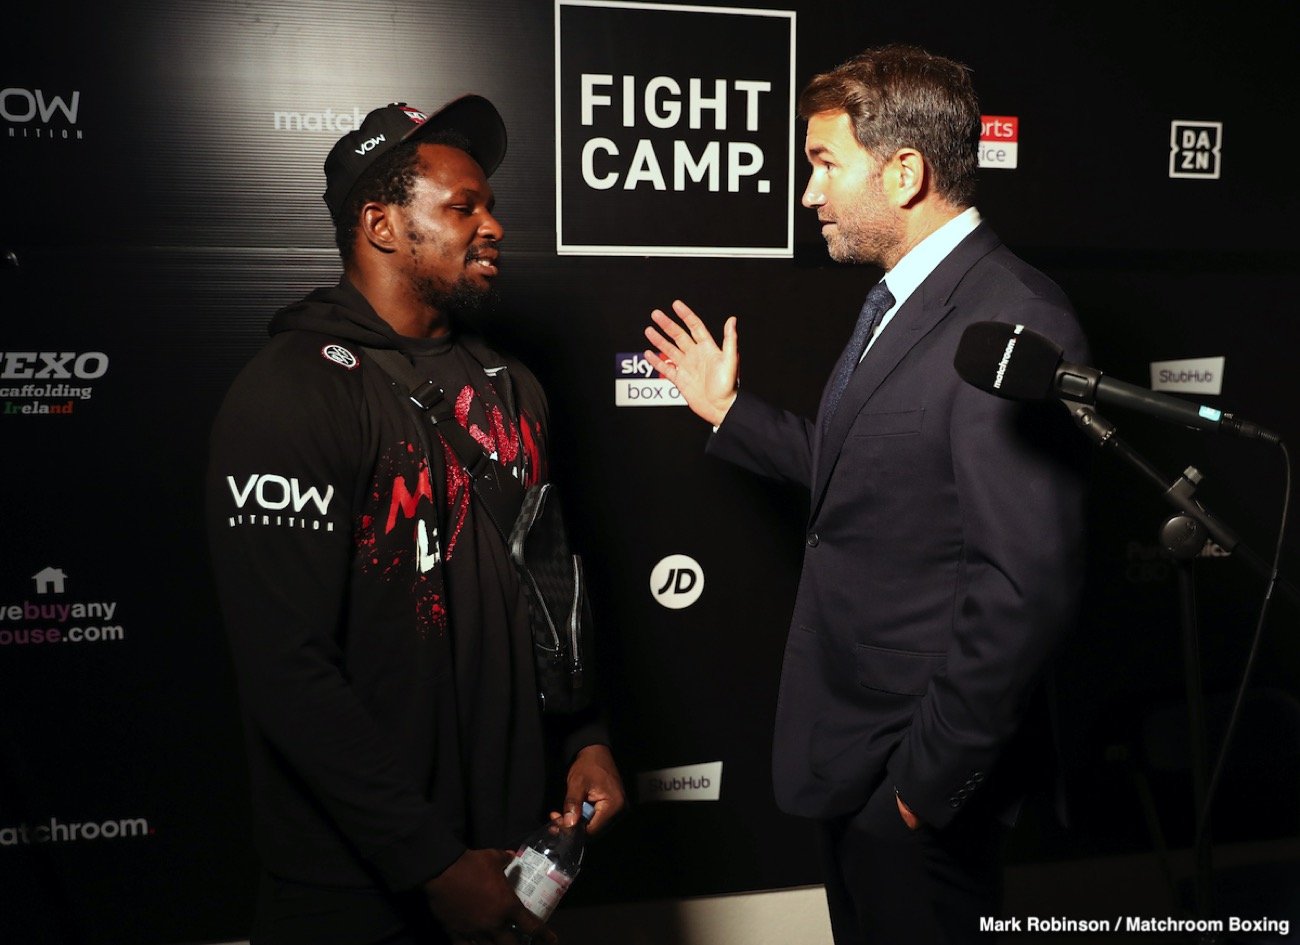 Image: Whyte not waiting until November for next fight, wants Arreola, Ruiz, Martin or Franklin